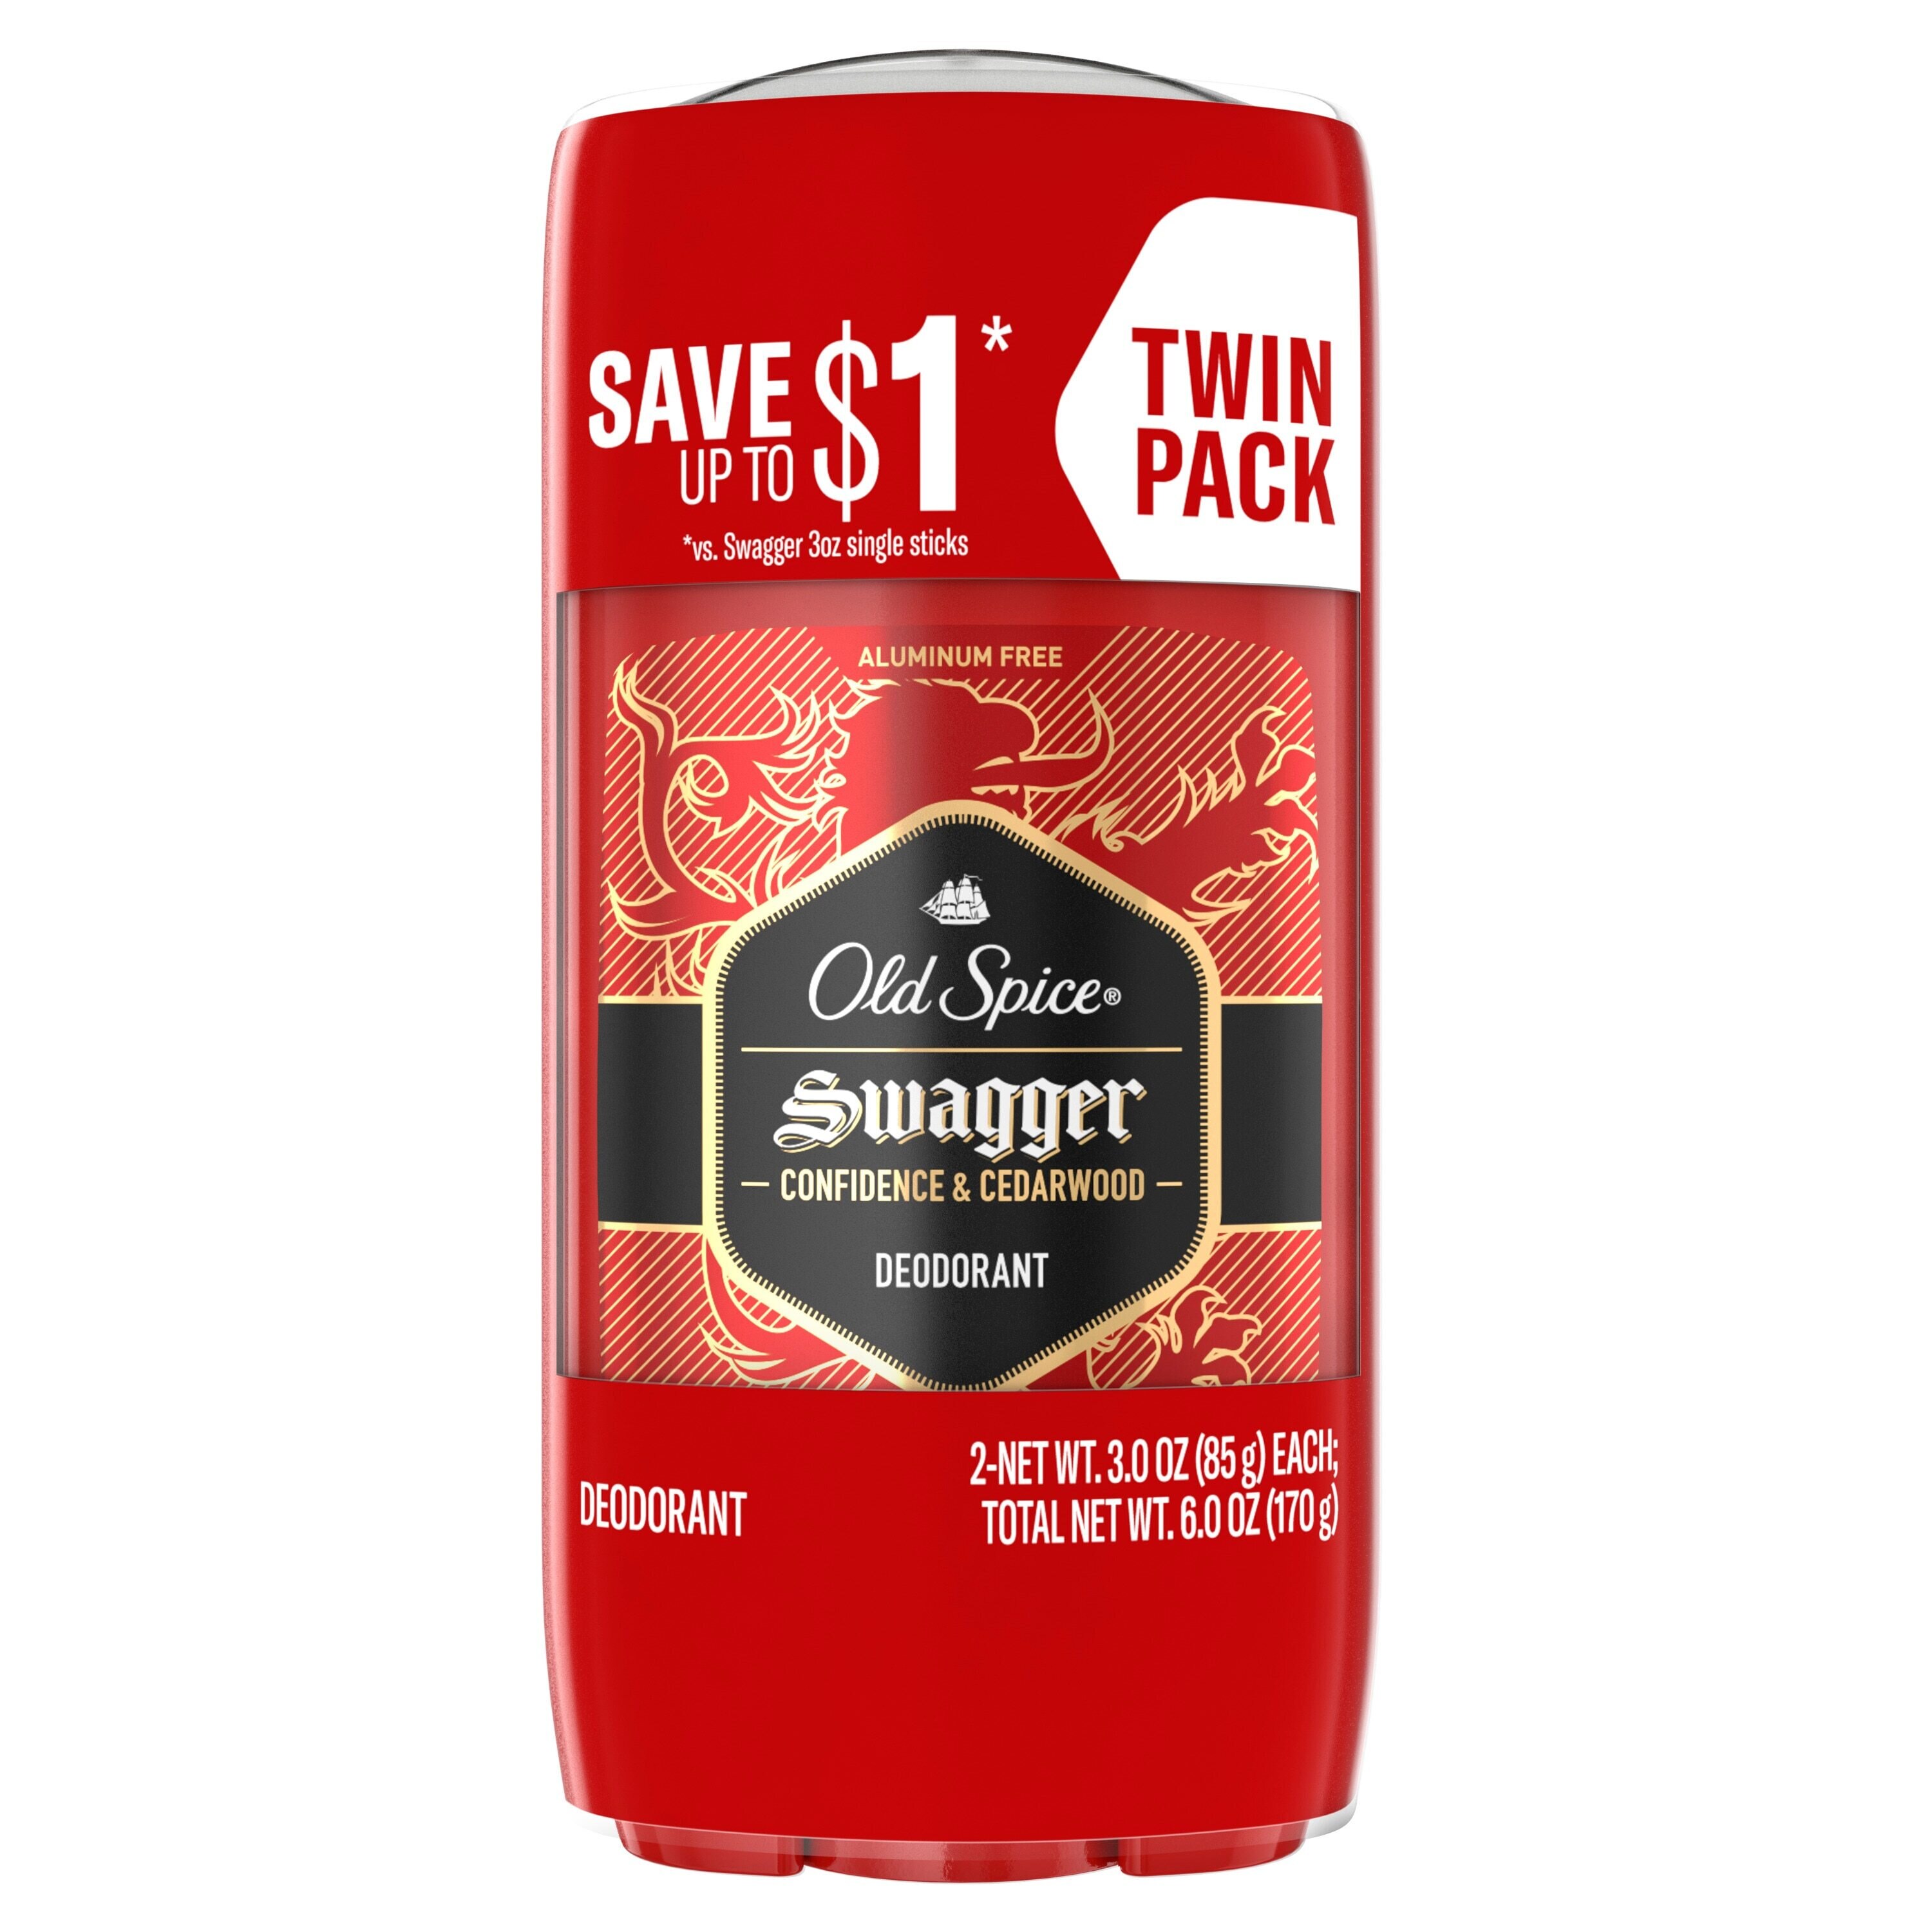 Old Spice Red Collection Swagger 48-Hour Deodorant Stick, Confidence & Cedarwood, 3 Oz, 2 Pack - 2.6 Oz , CVS